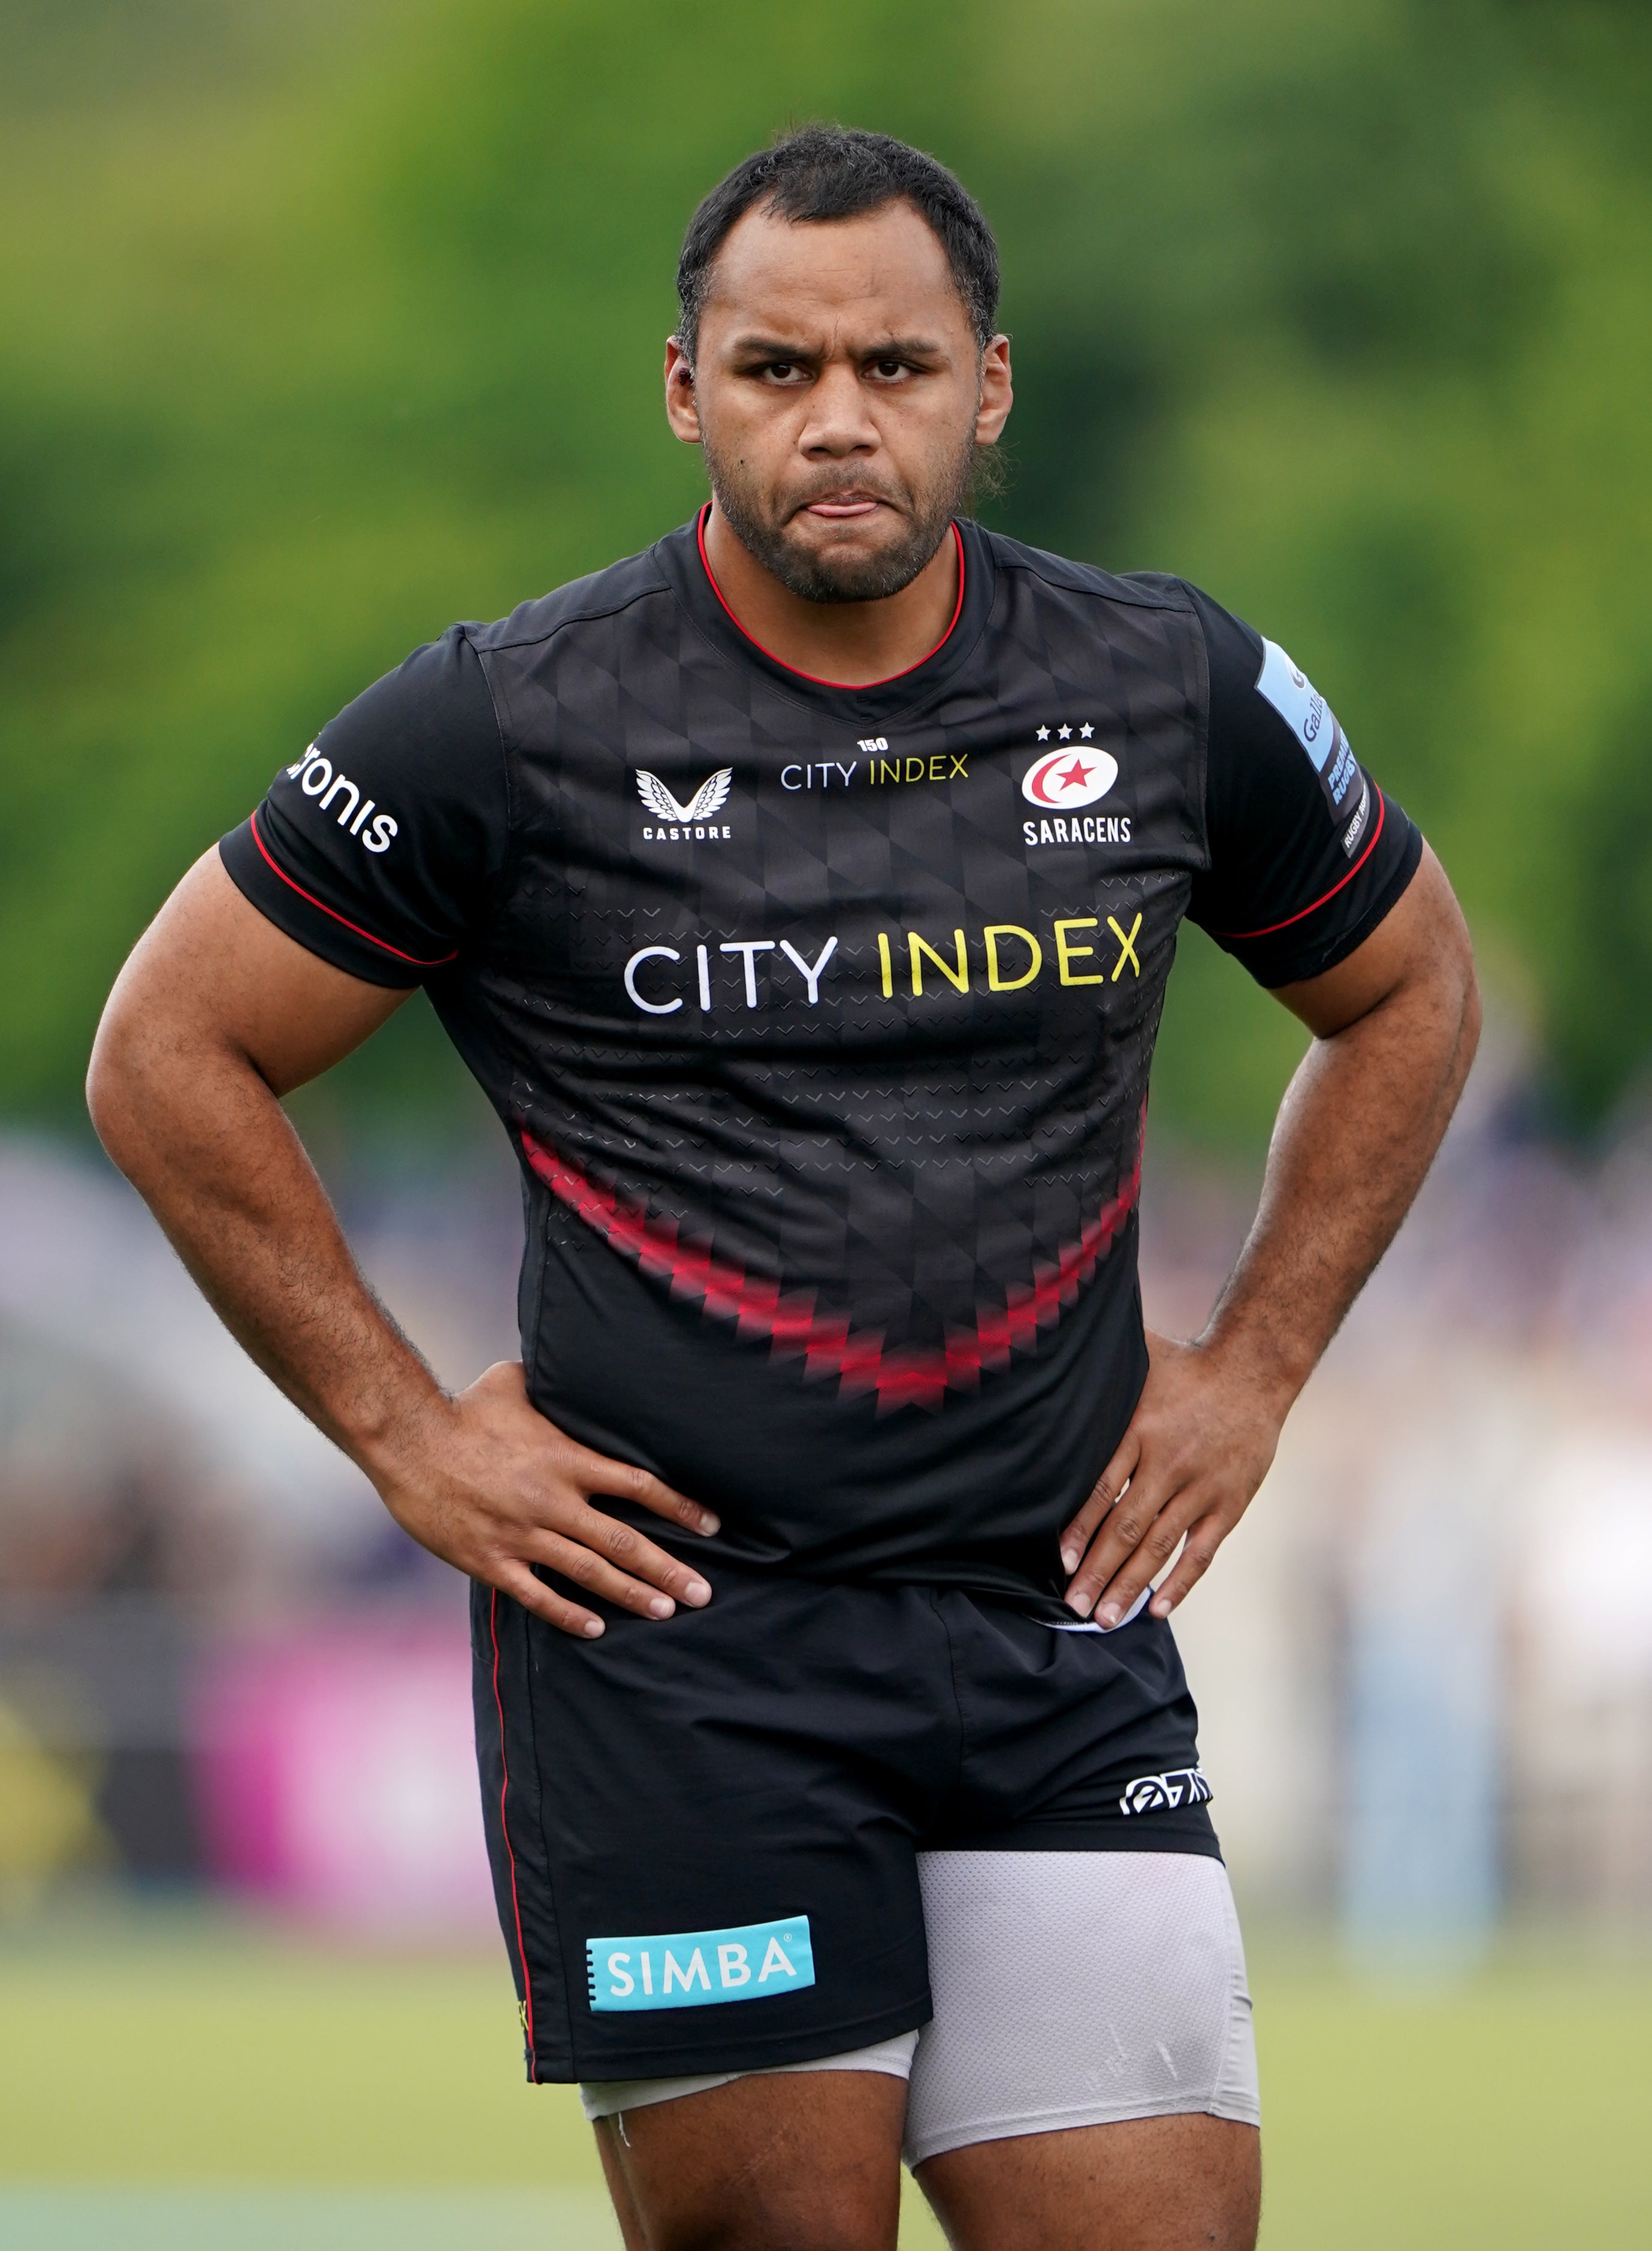 Billy Vunipola made changes to win his England place back (Joe Giddens/PA)